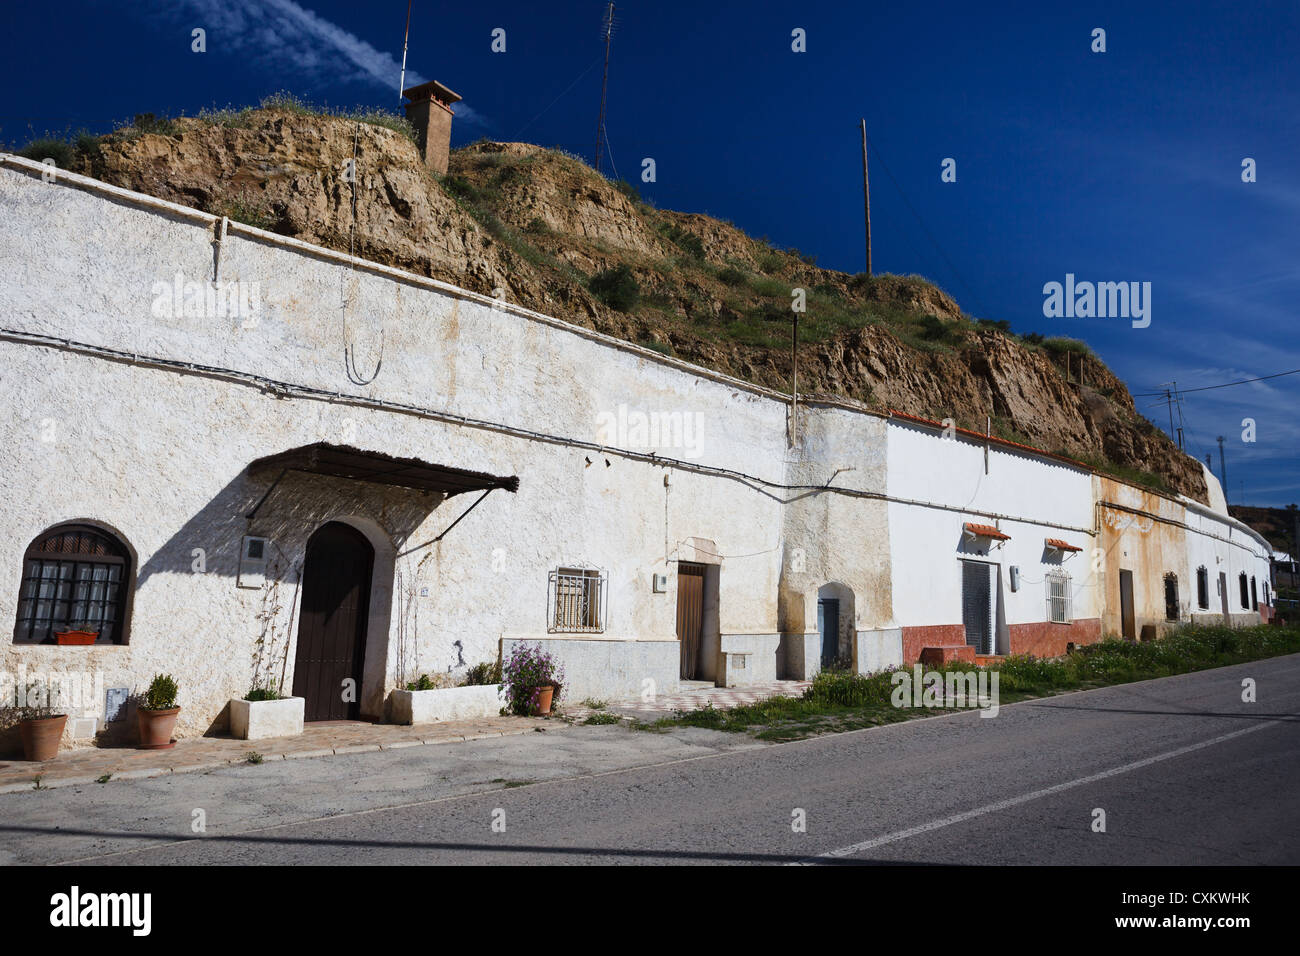 Row of whitewashed hillside cave houses line the road in Guadix, Spain Stock Photo